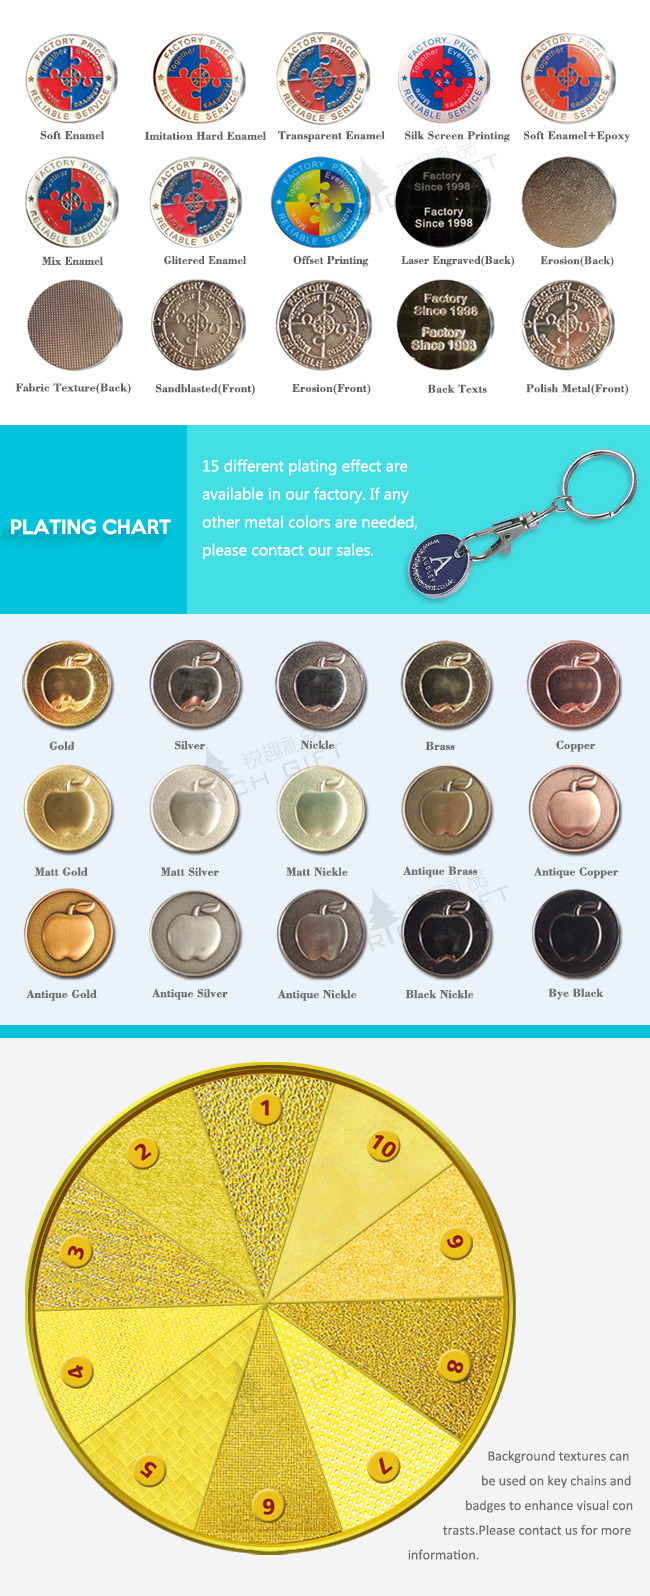 Customized Colorful Lemon Slice Shape Cmyk Printed Zinc Alloy Metal Keychain Supermarket Shopping Lock Operated Trolley Token Coin with Gift Packing Box